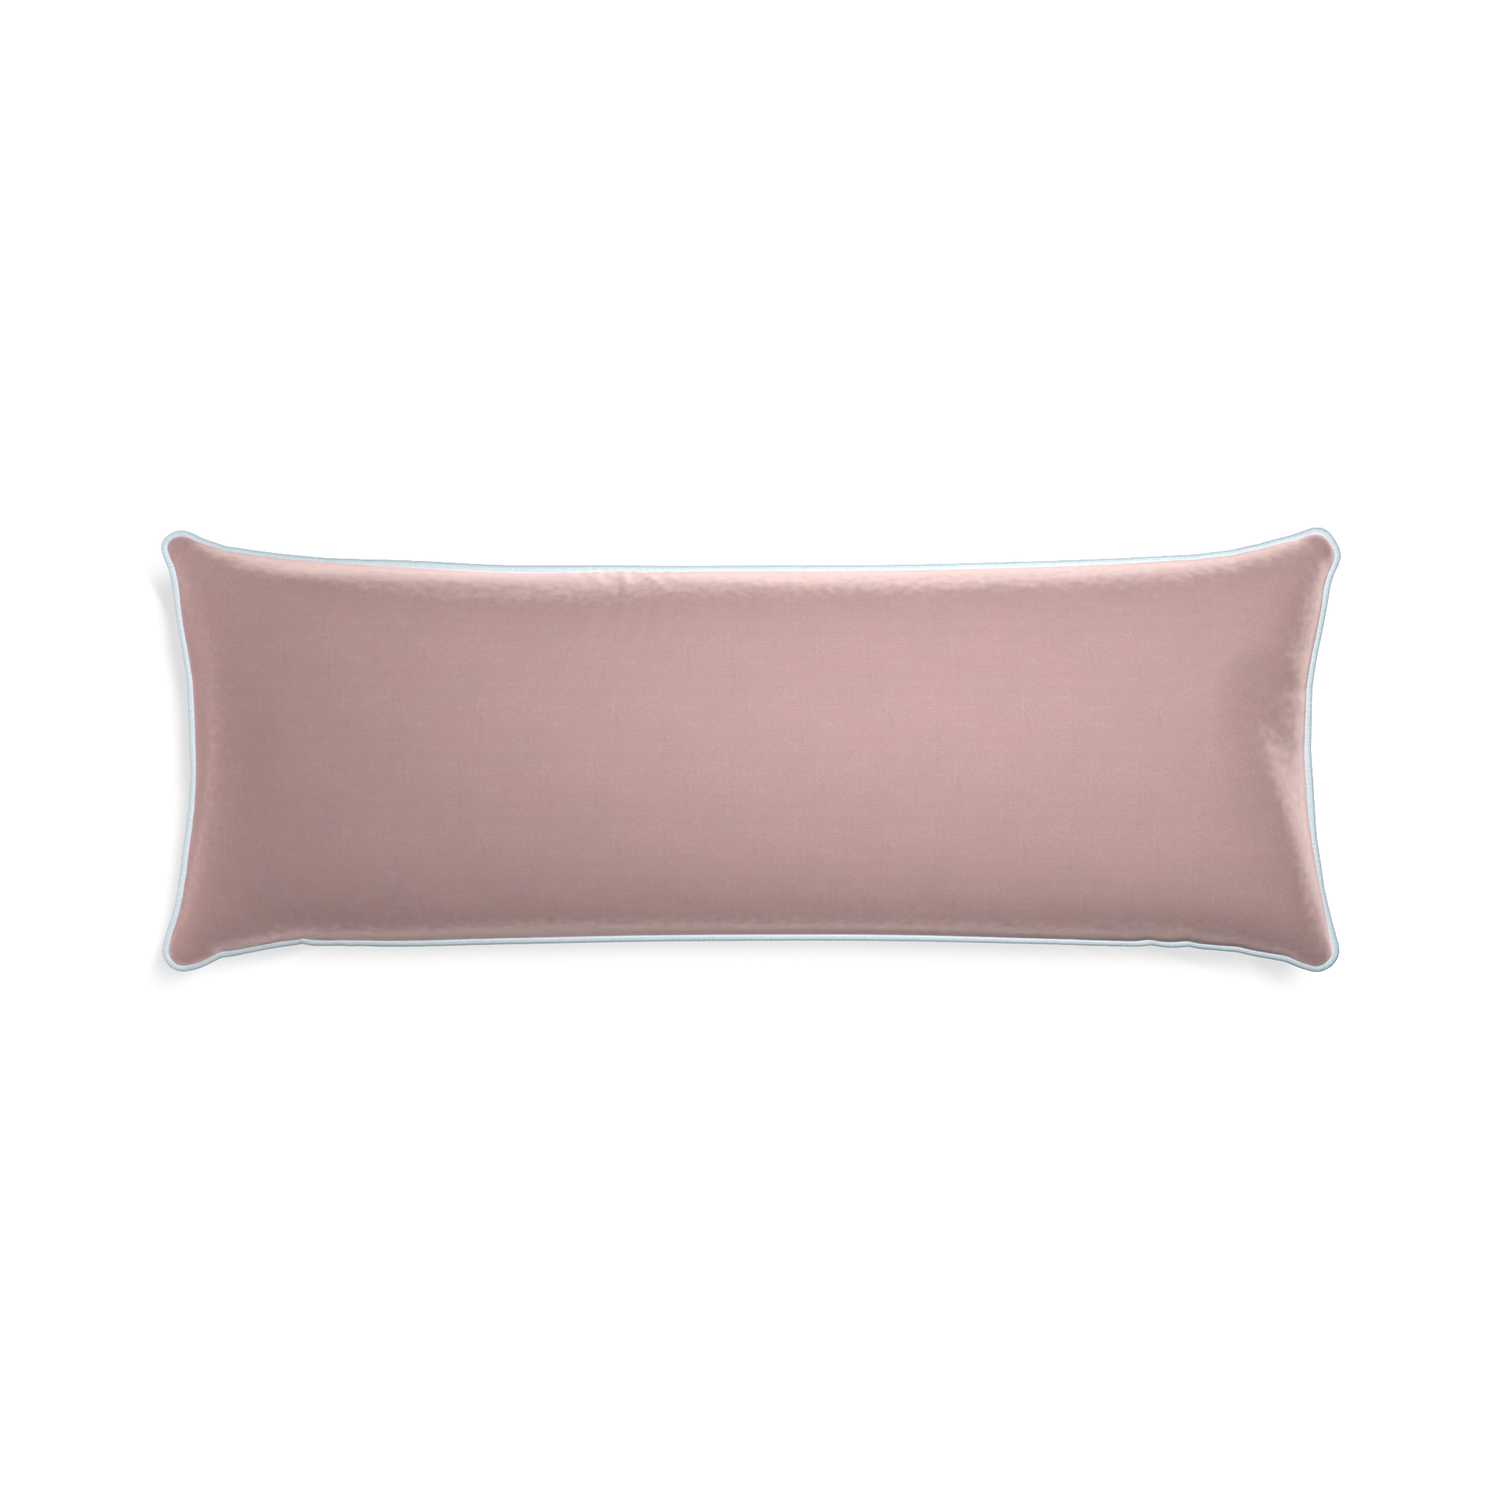 rectangle mauve velvet pillow with light blue piping